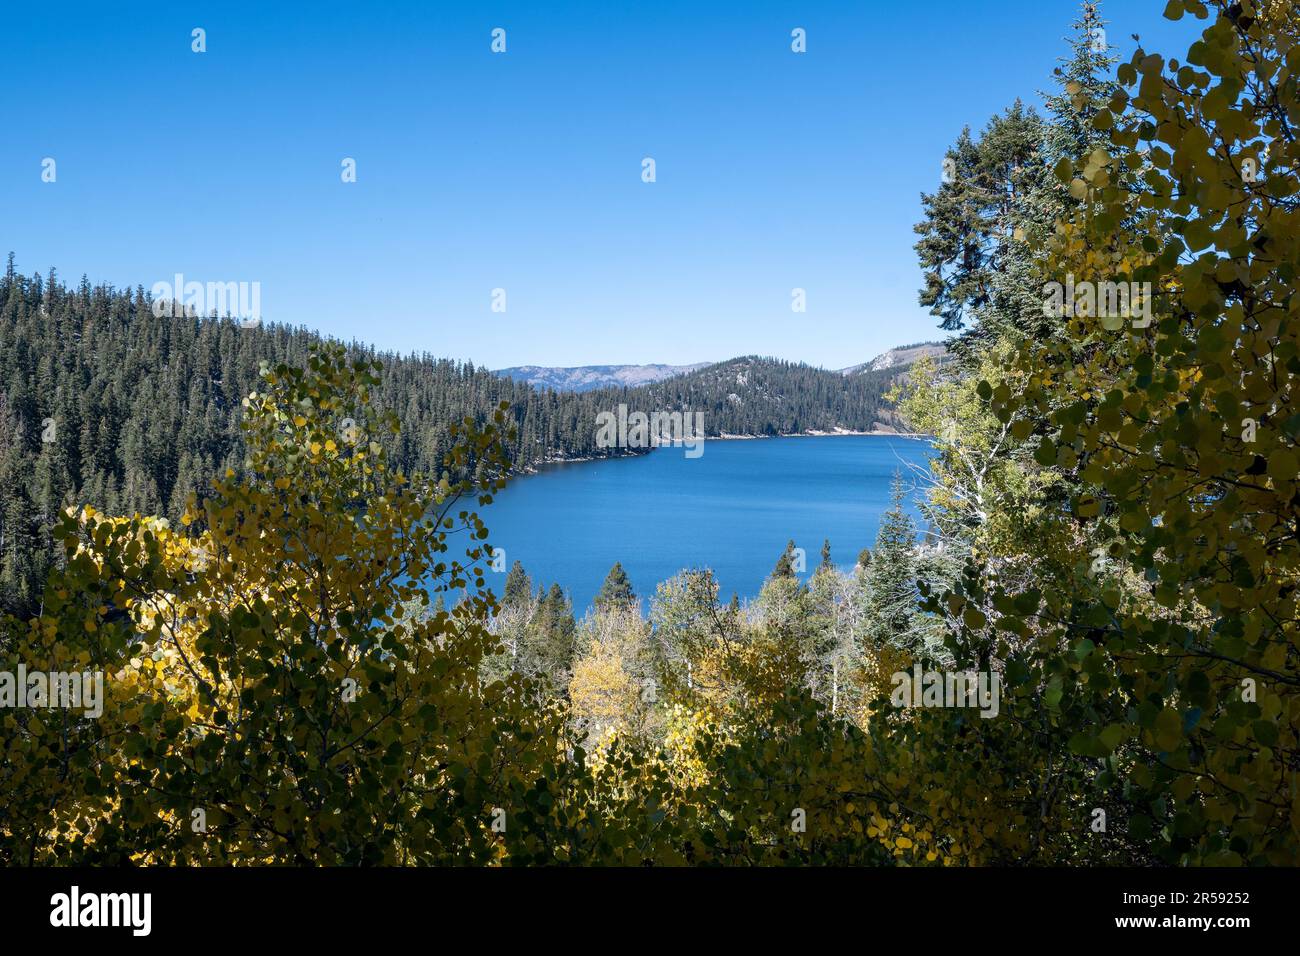 View of Marlette Lake from the trail that starts at the Spooner lake, a popular Autumn hiking destination for the colorful aspen trees Stock Photo